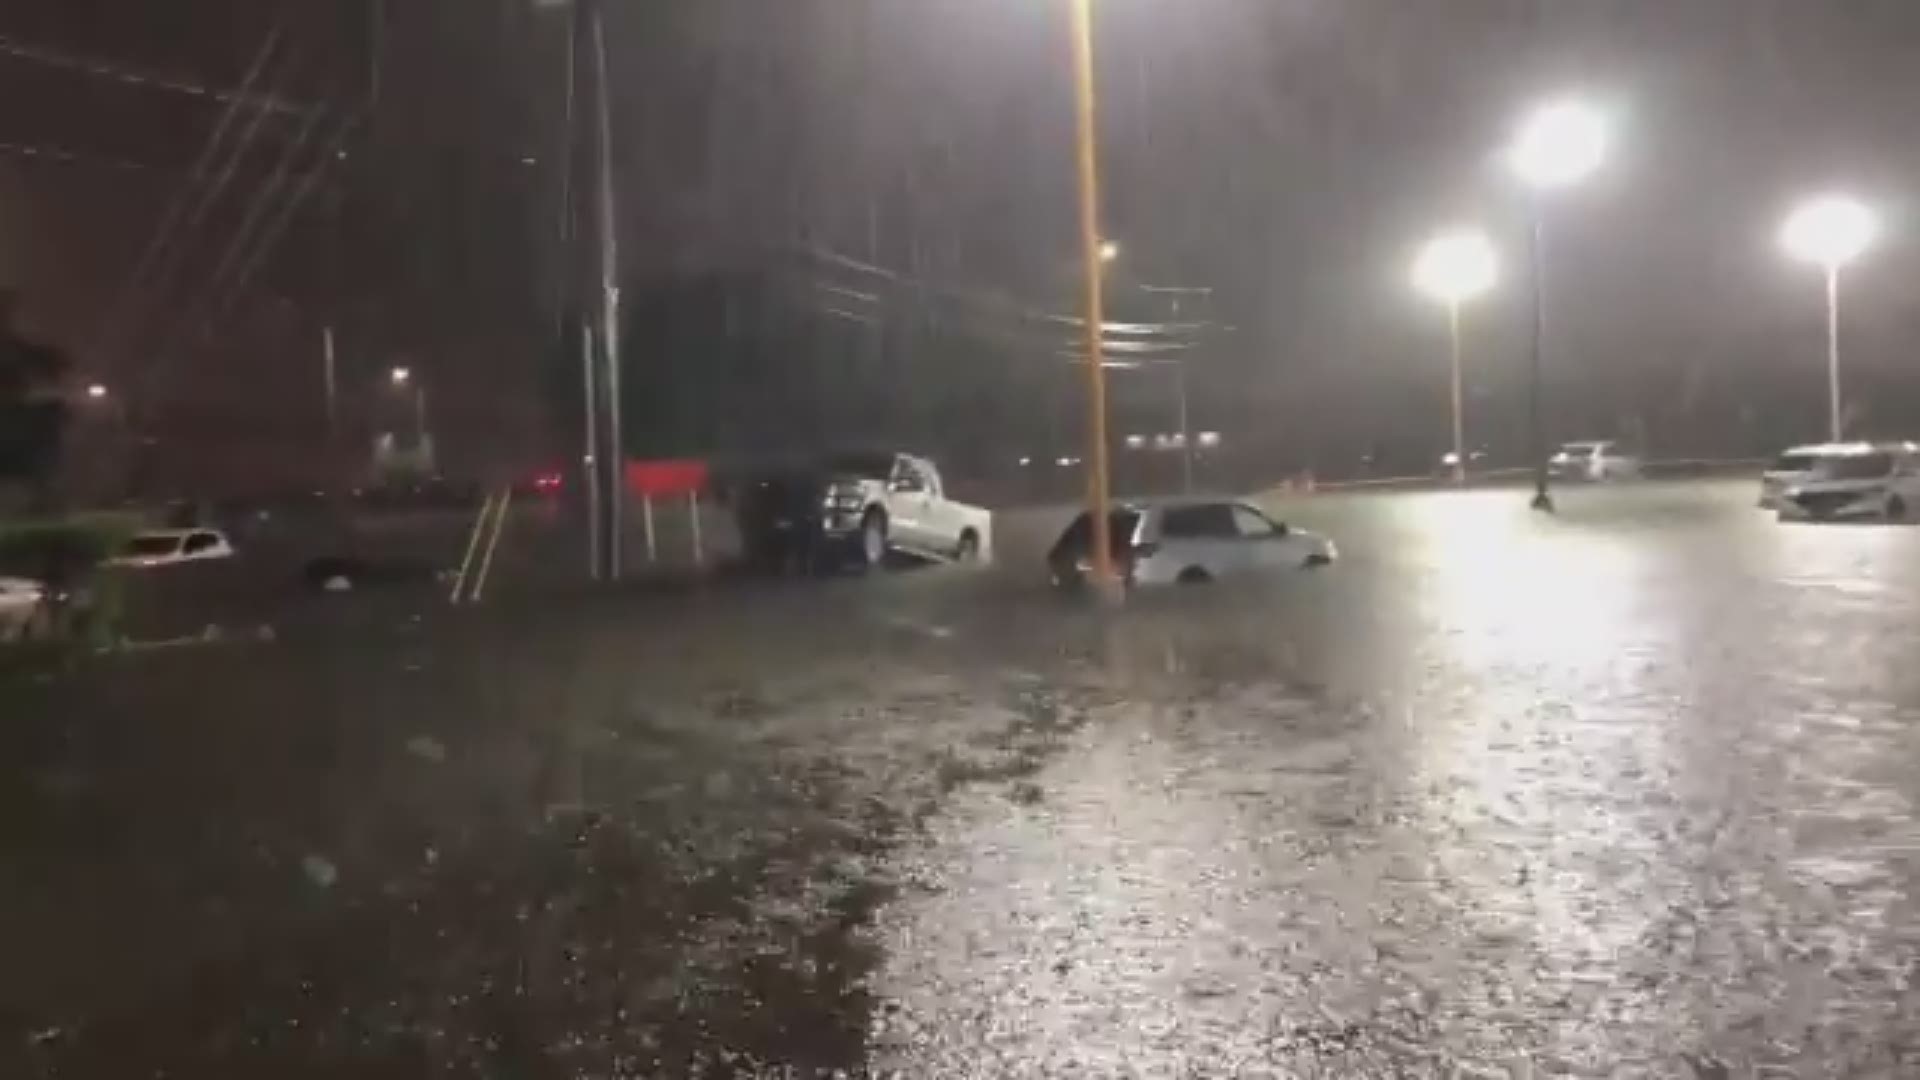 Twitter user @PastorJaimeG captured this flooding video in southwest Houston after rain from Tropical Storm Beta moved in Monday.